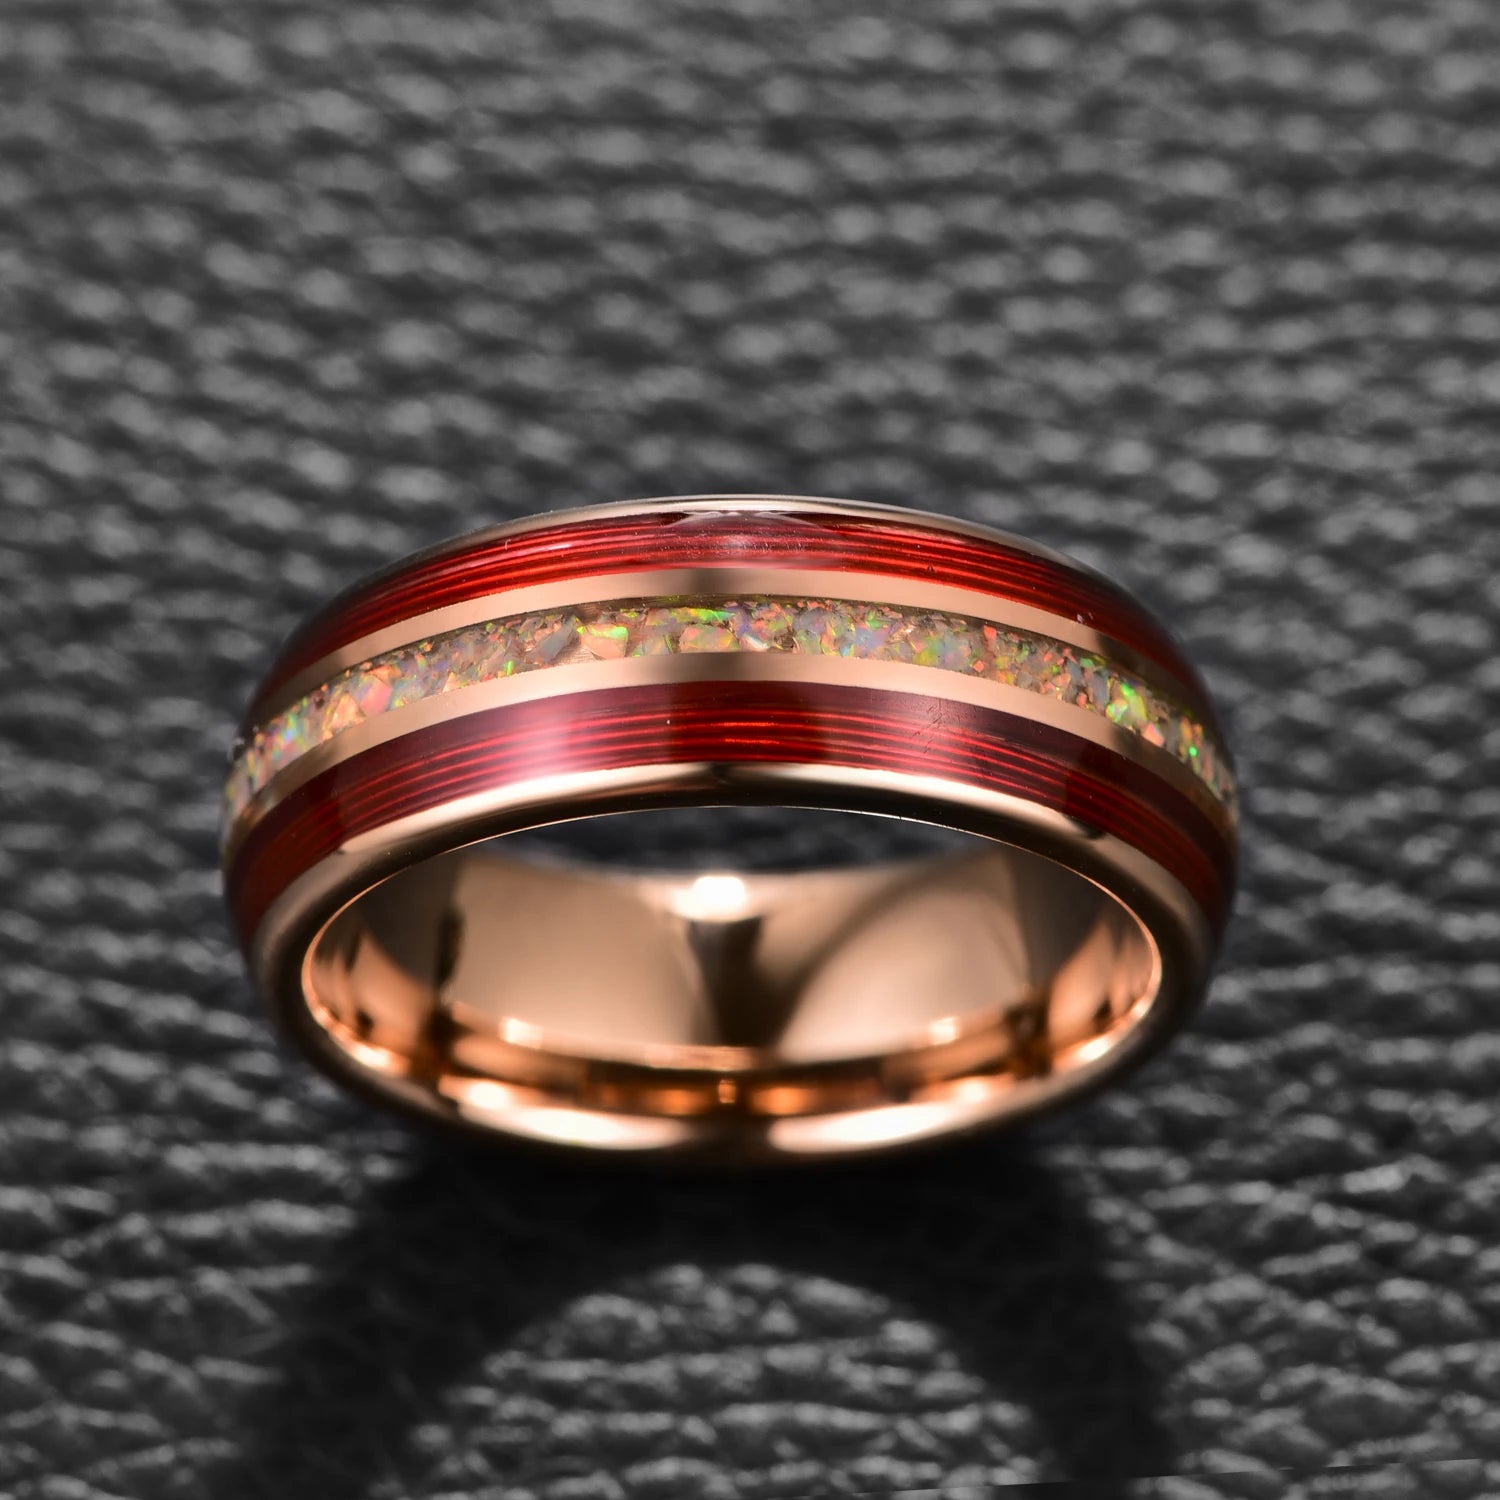 Skald Honor Tungsten Carbide Ring Inlaid With Opal and Red Guitar String